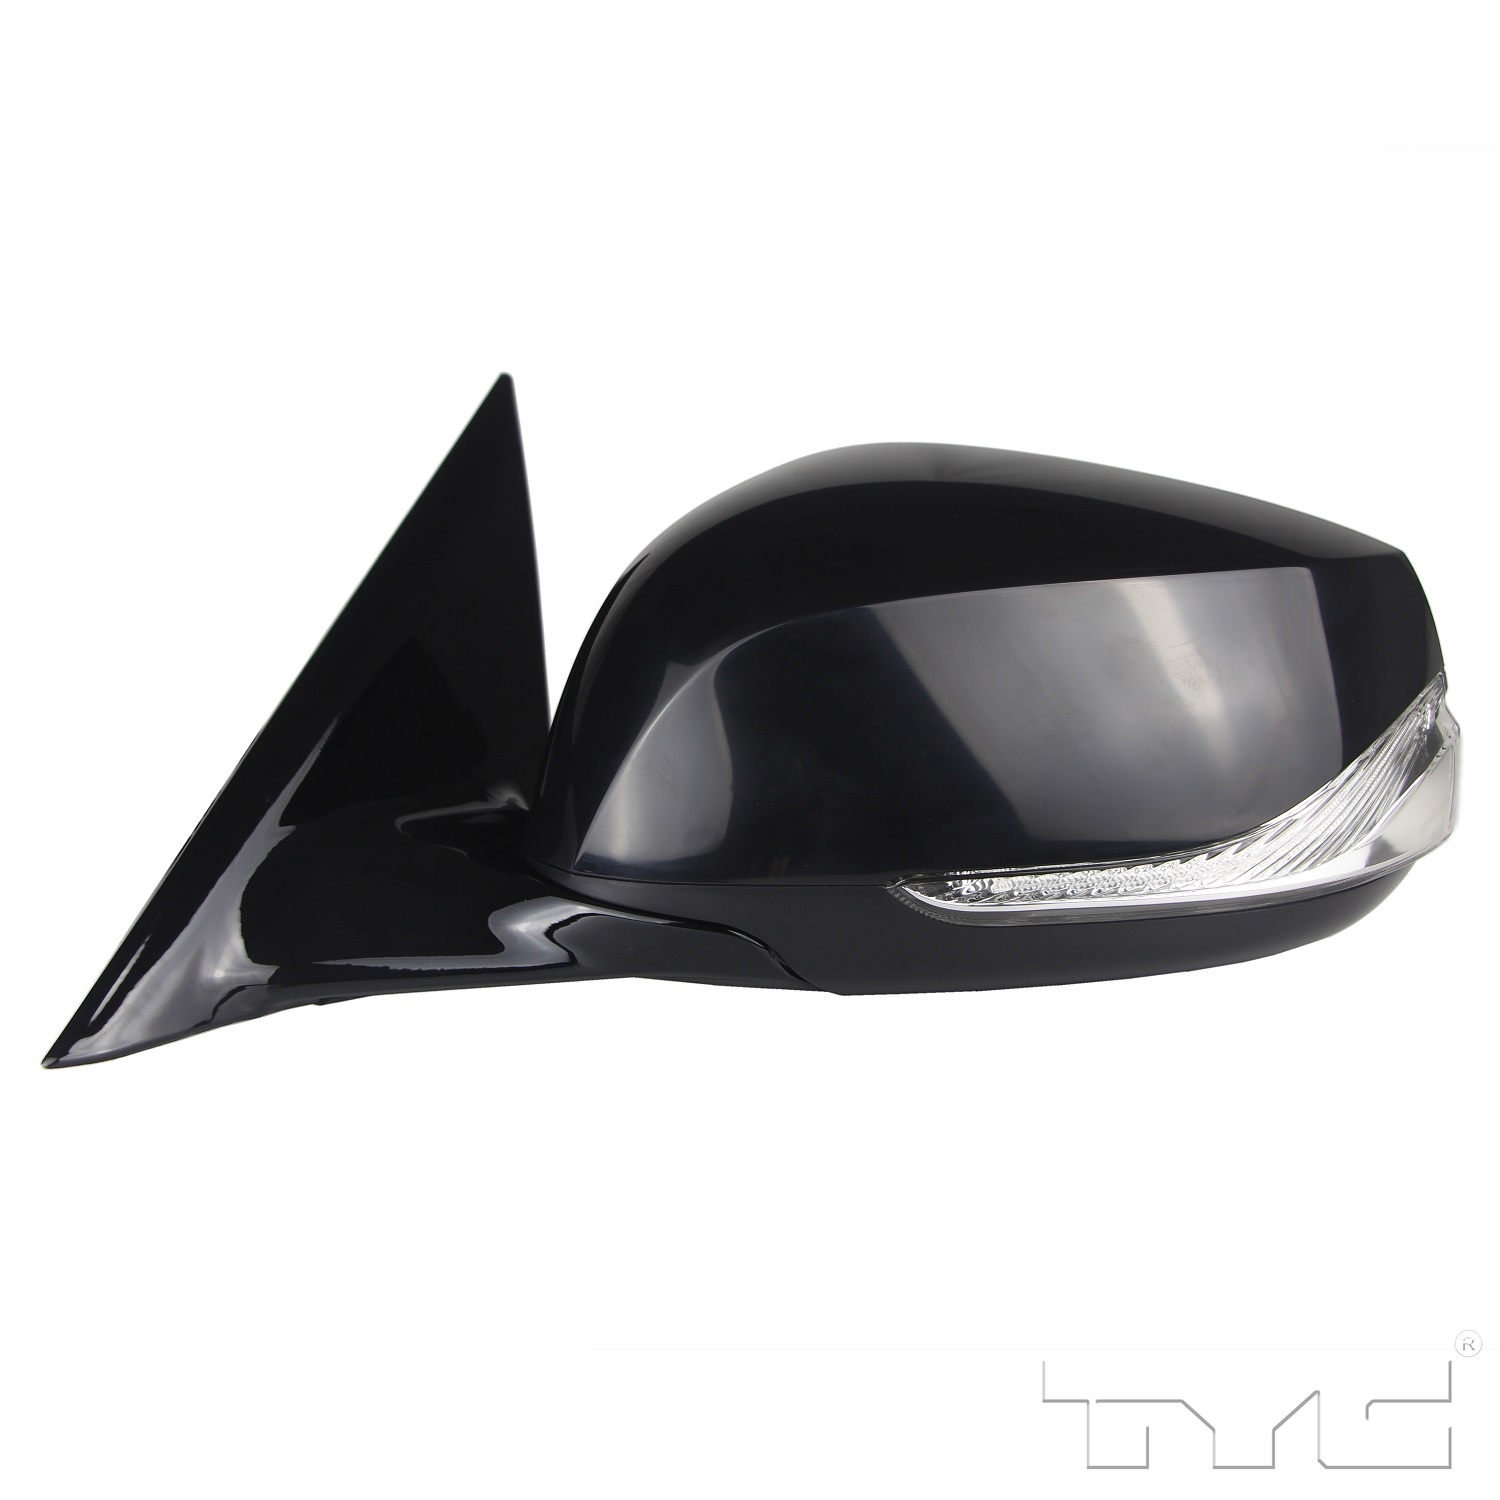 Aftermarket MIRRORS for INFINITI - Q50, Q50,14-17,LT Mirror outside rear view